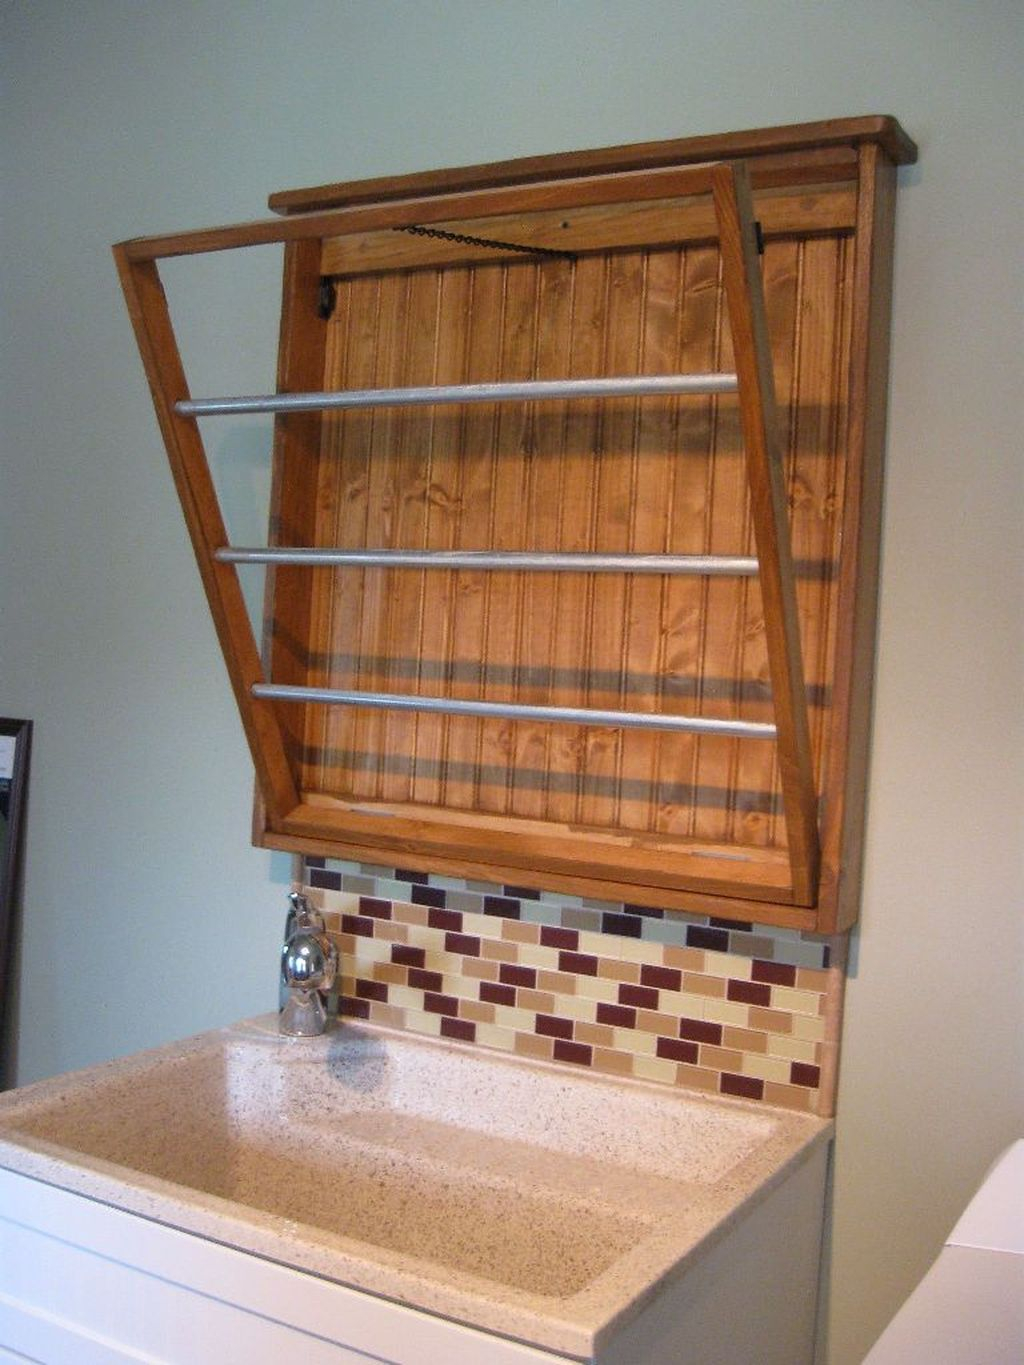 Hottest Diy Drying Place Design Ideas To Try 12